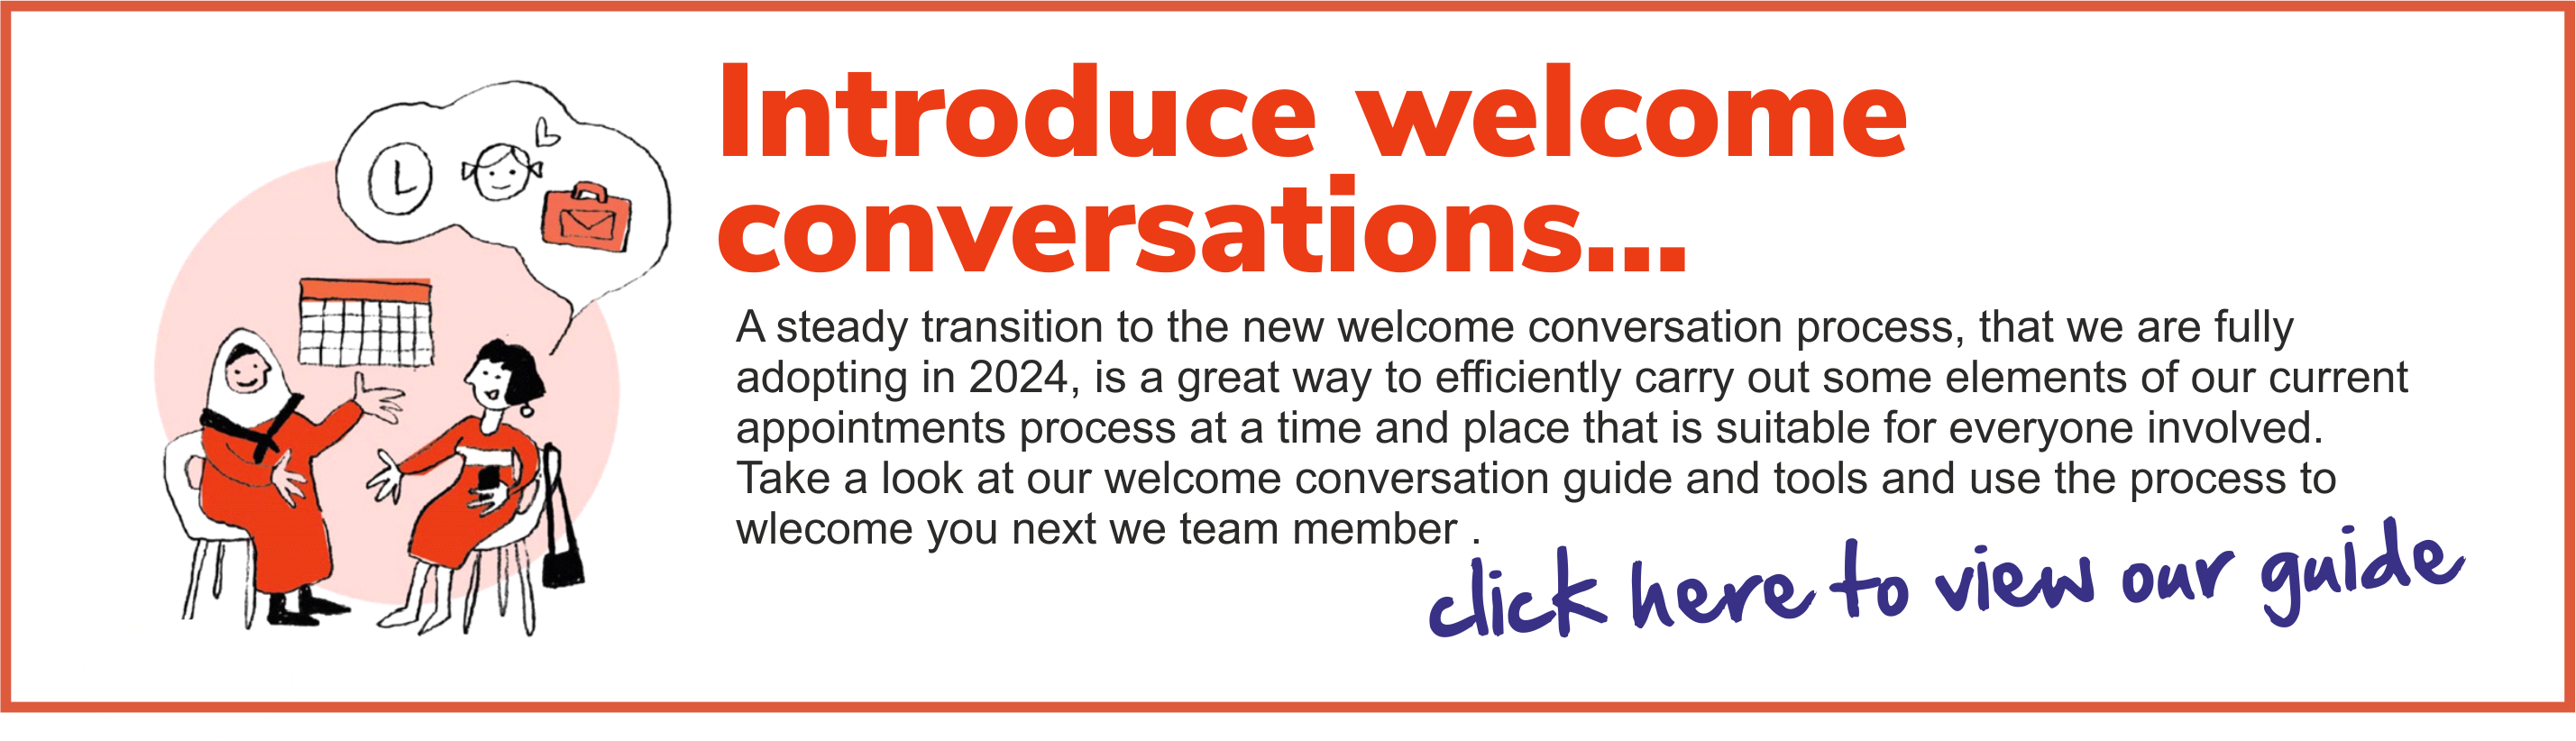 Introduce welcome conversations...